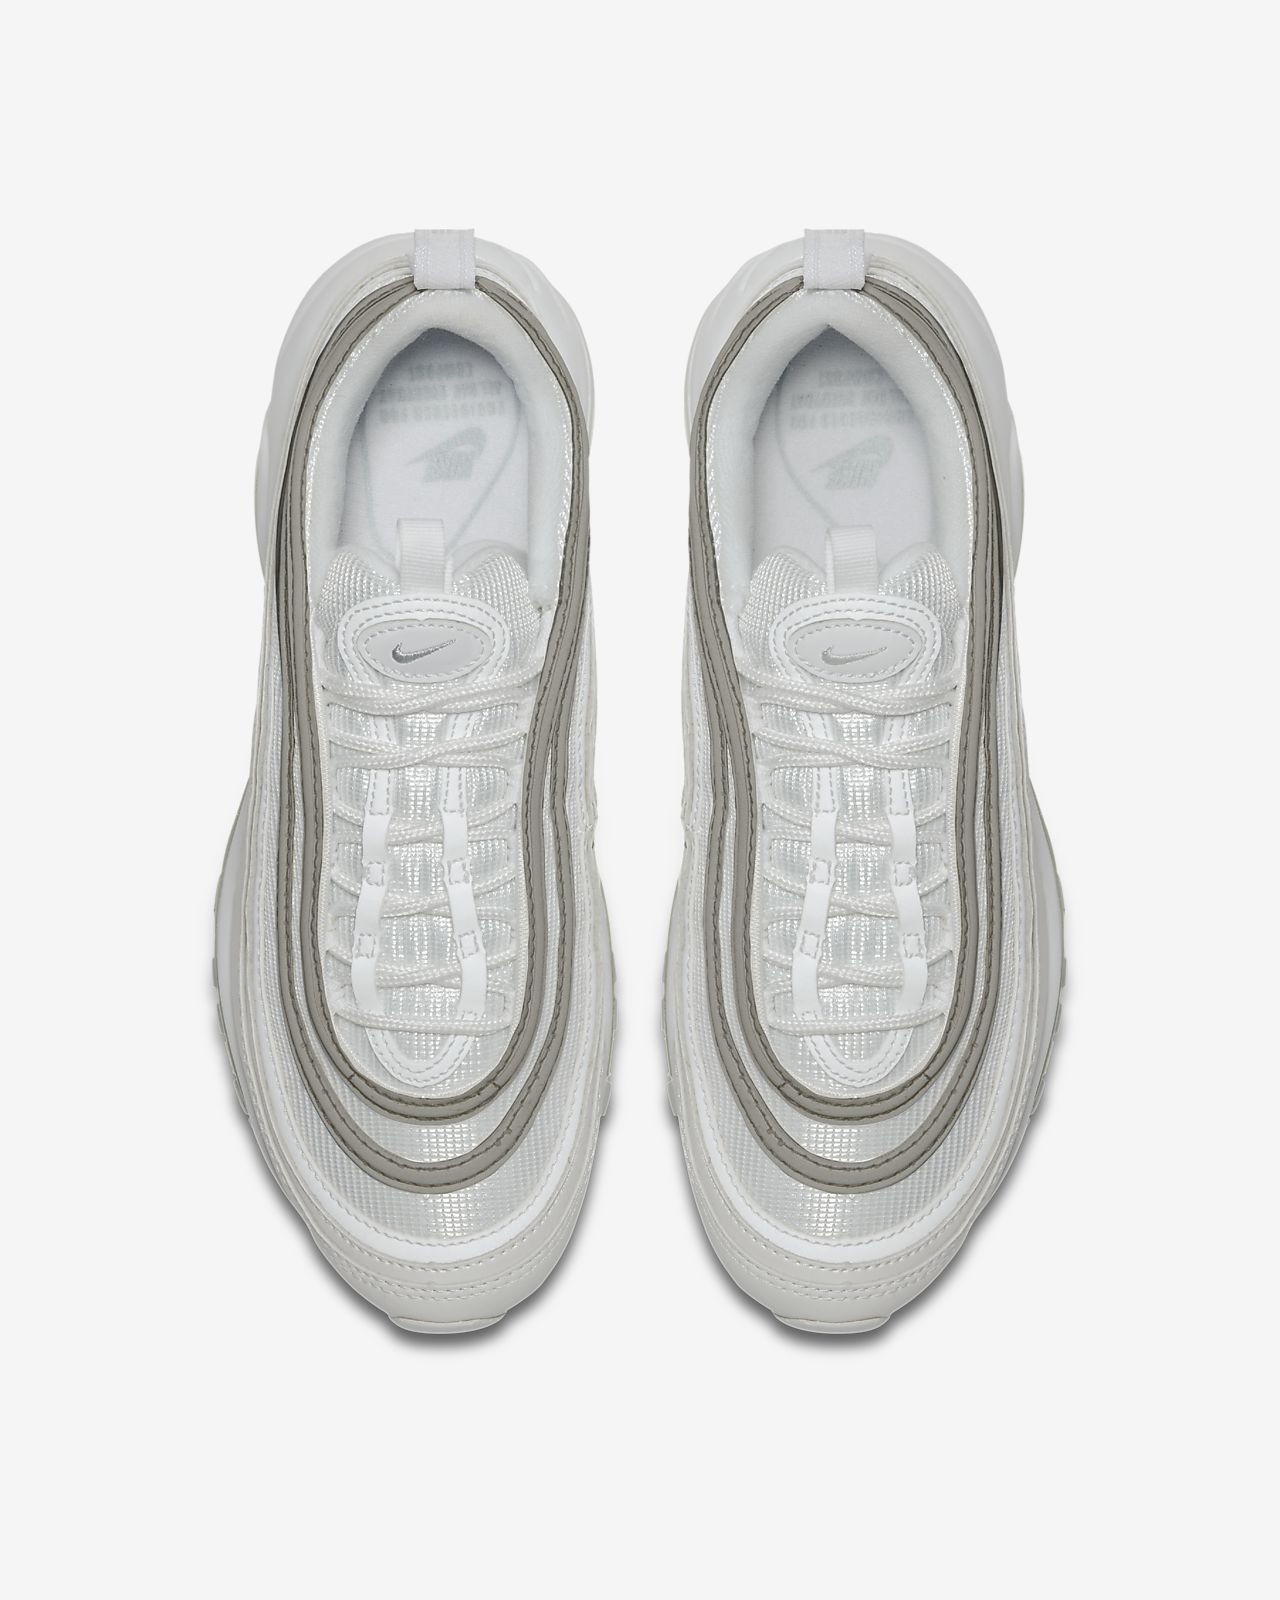 Nike Official Nike Air Max 97 Women S Shoe Online Store Mail